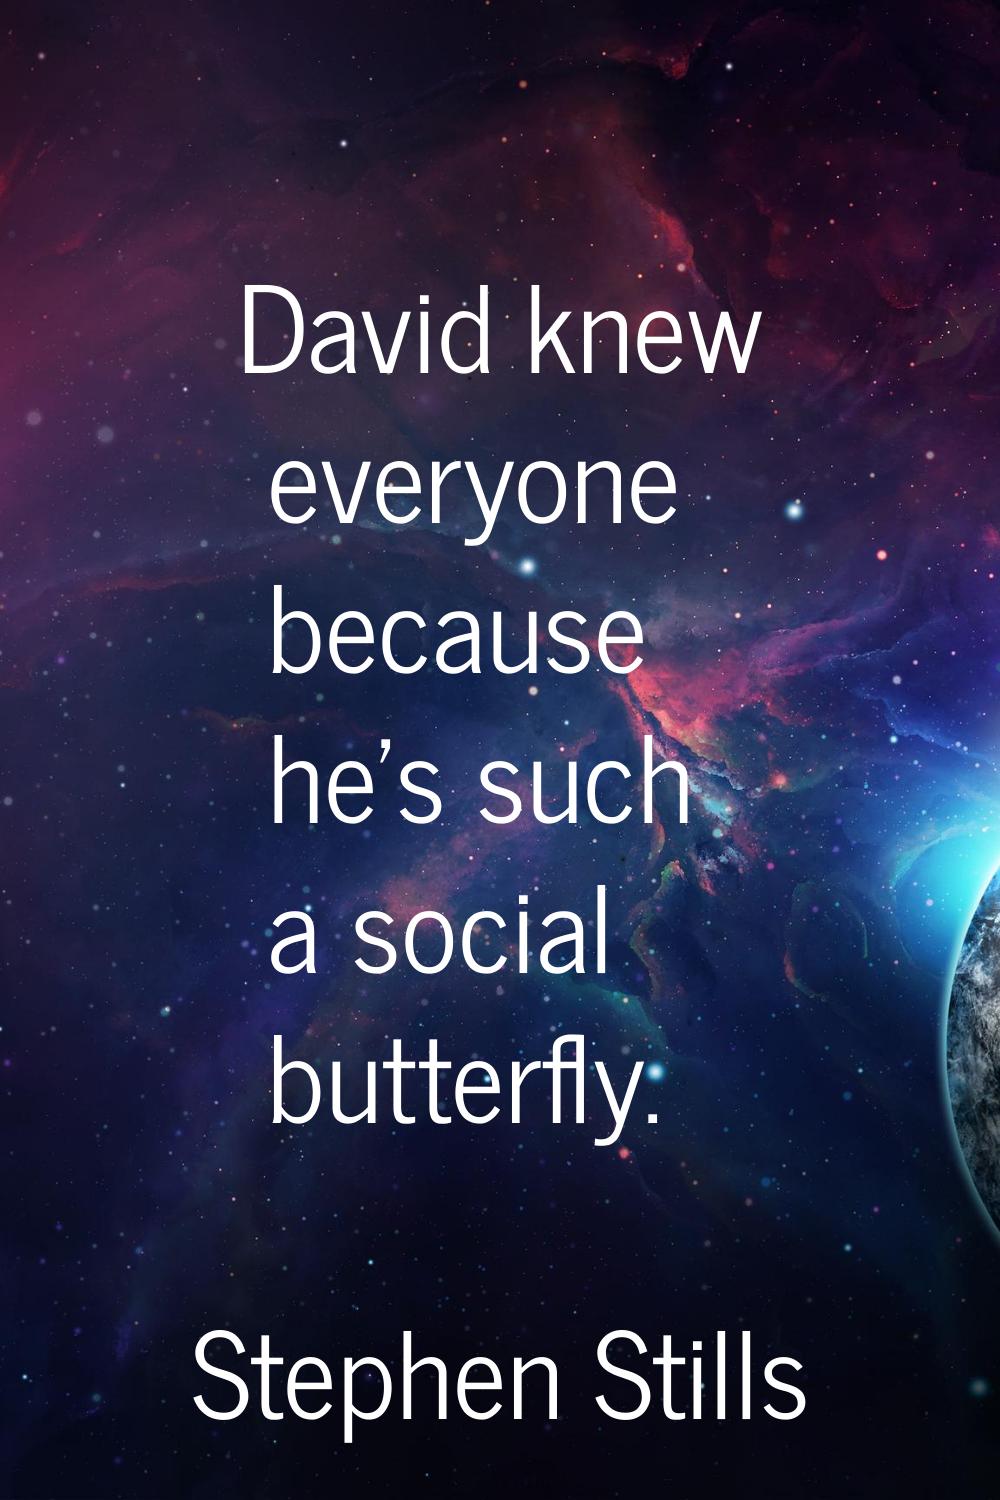 David knew everyone because he's such a social butterfly.